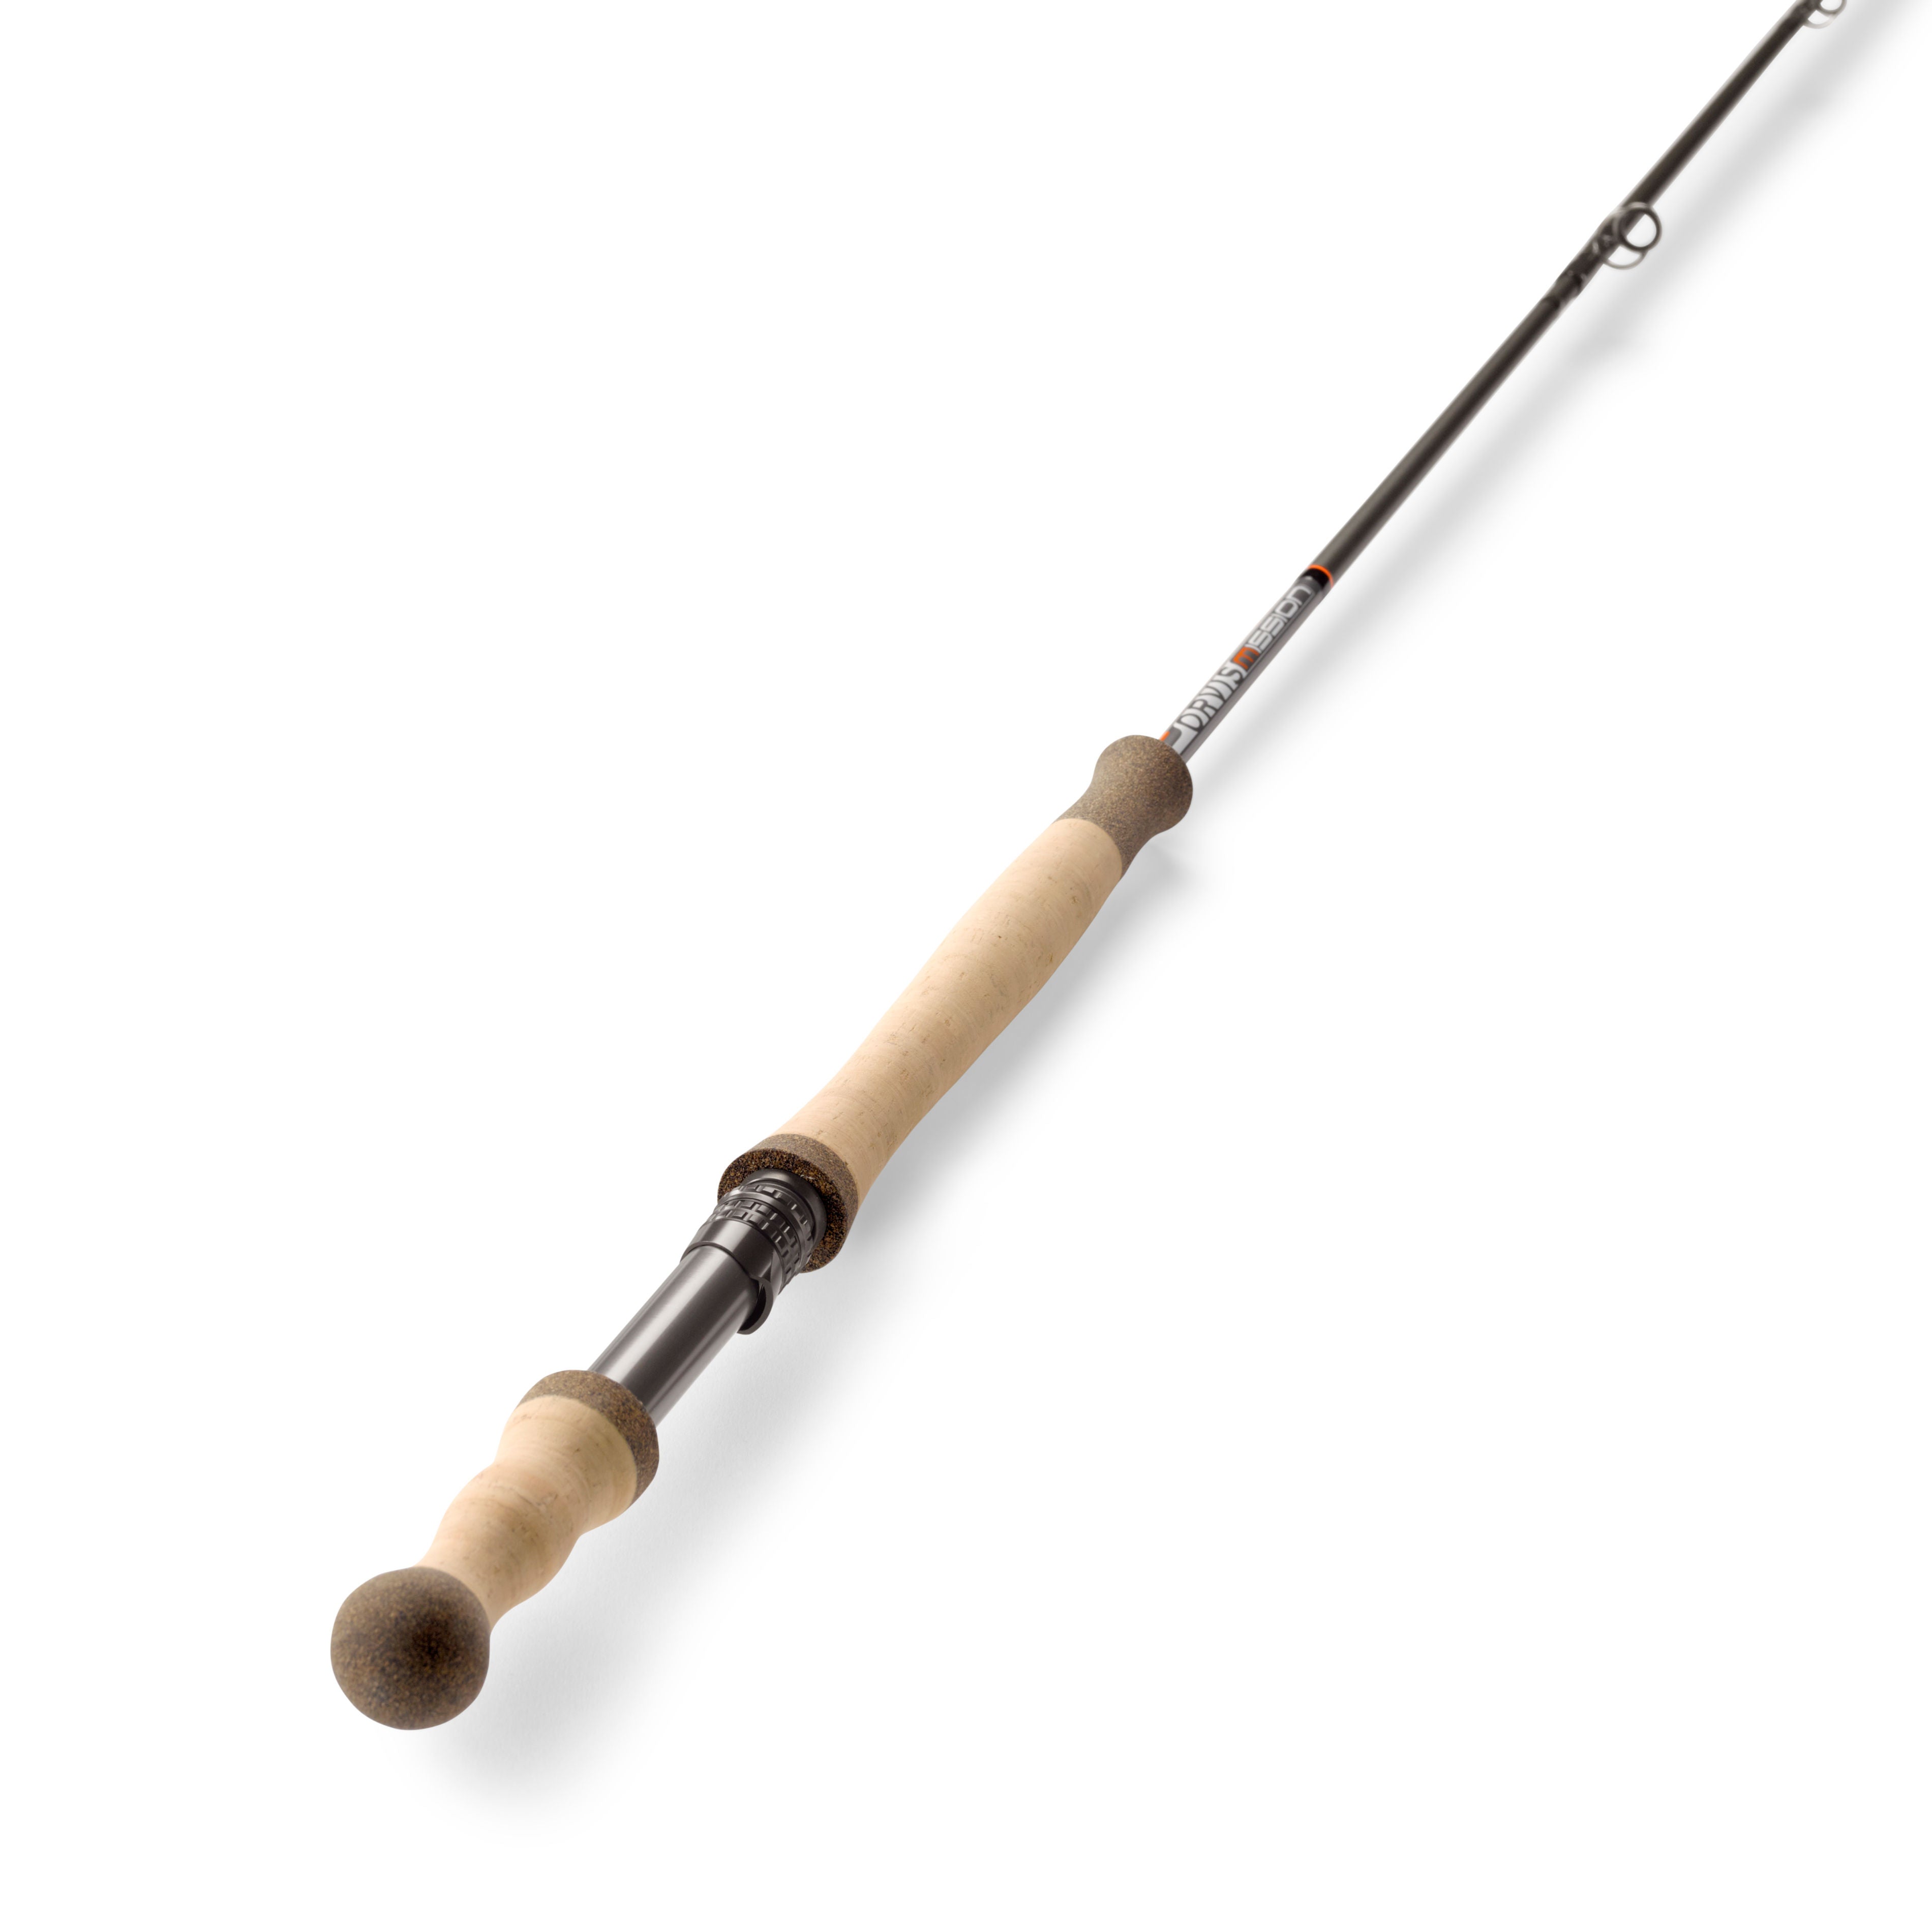 Mission Two-Handed 11'4 3-Weight Fly Rod